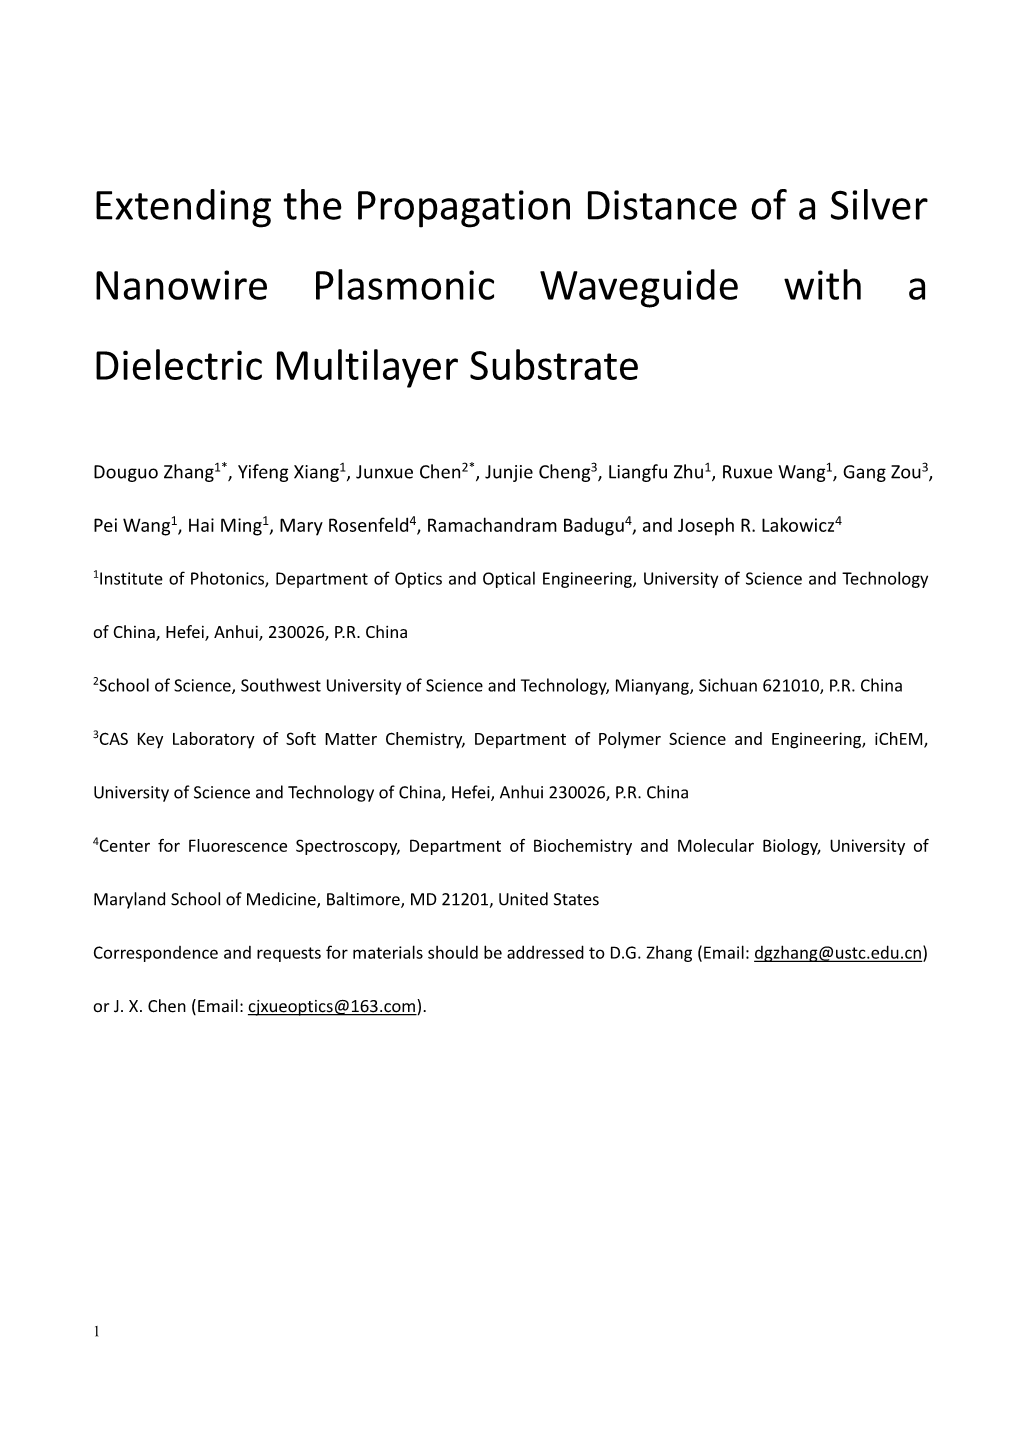 Extending the Propagation Distance of a Silver Nanowire Plasmonic Waveguide with a Dielectric Multilayer Substrate